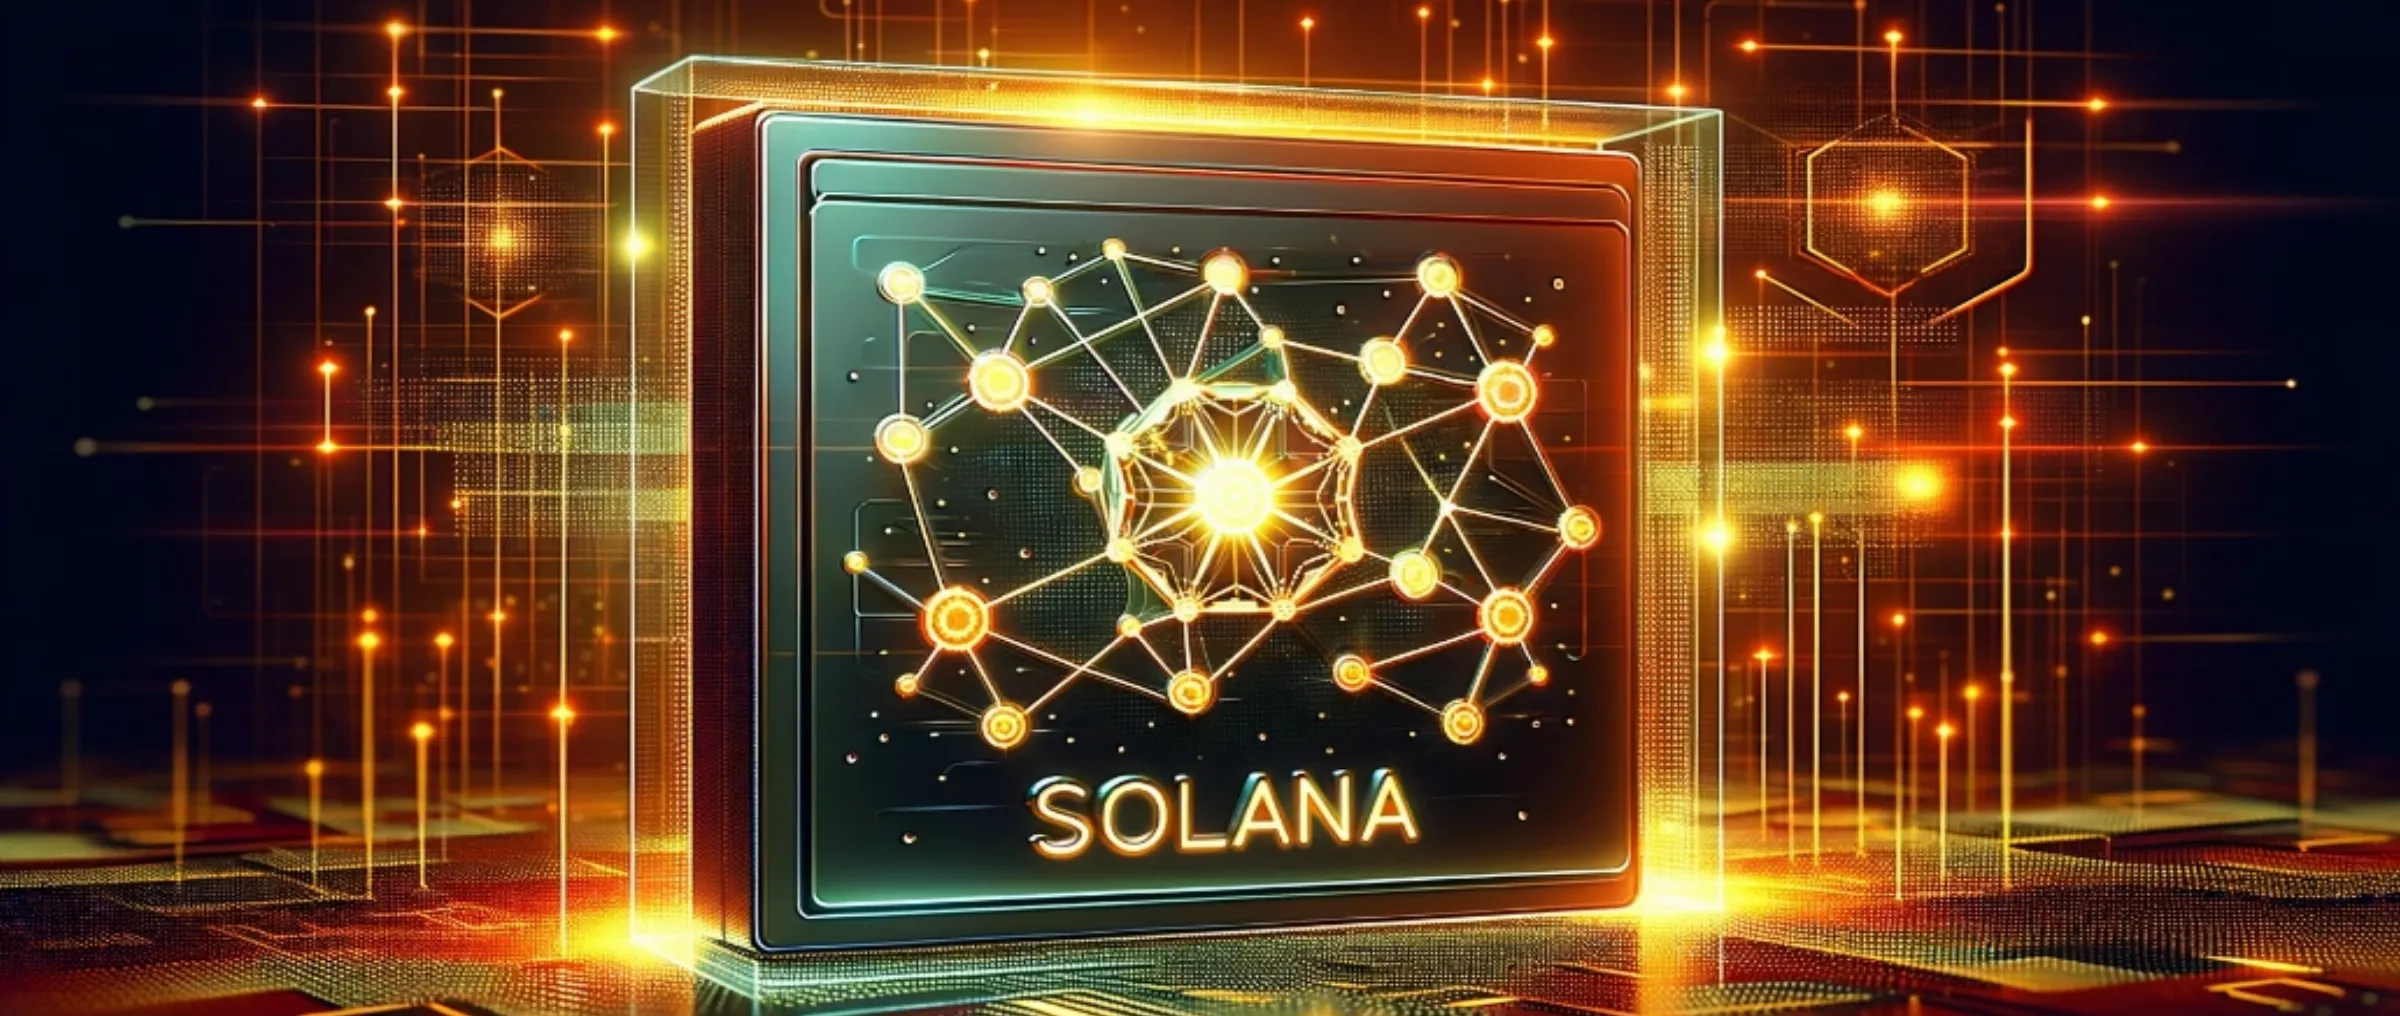 The work of the Solana blockchain has been temporarily suspended